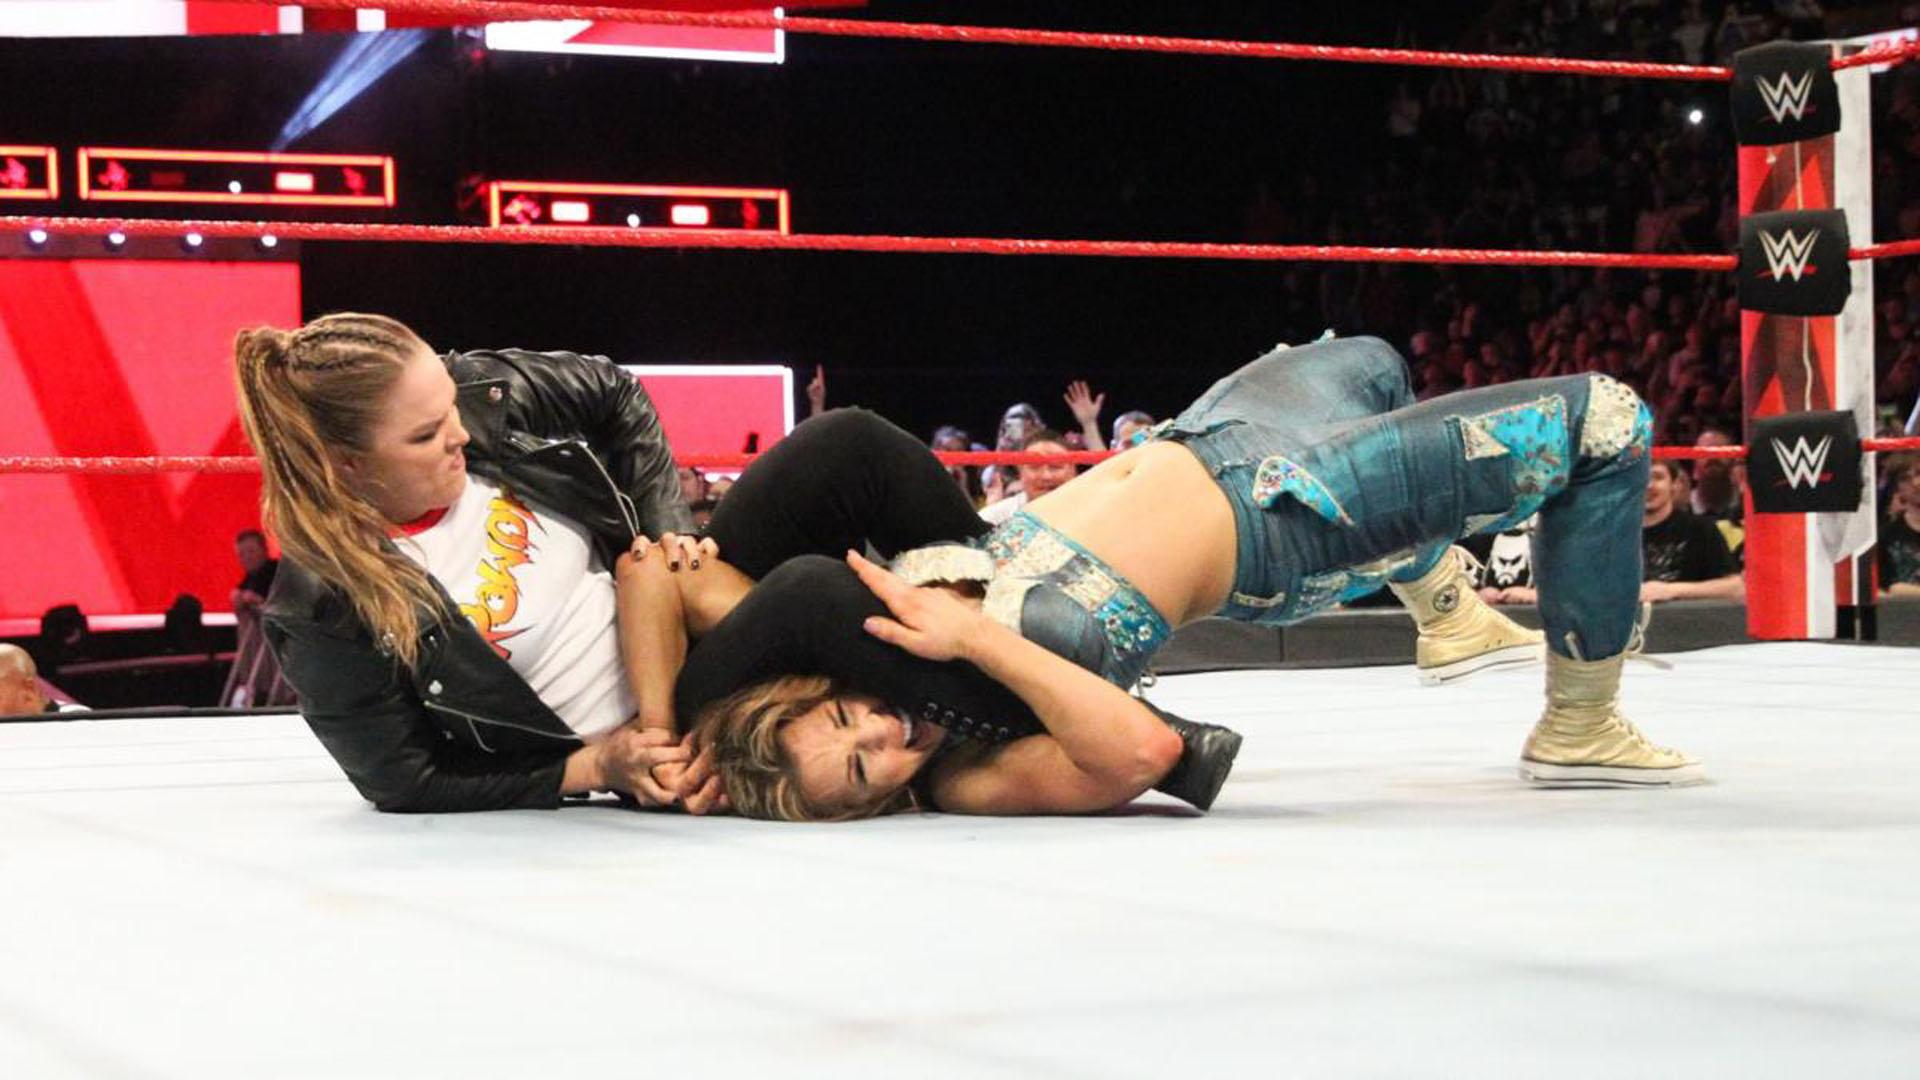 WWE Raw: Ronda Rousey rescues Natalya from attack